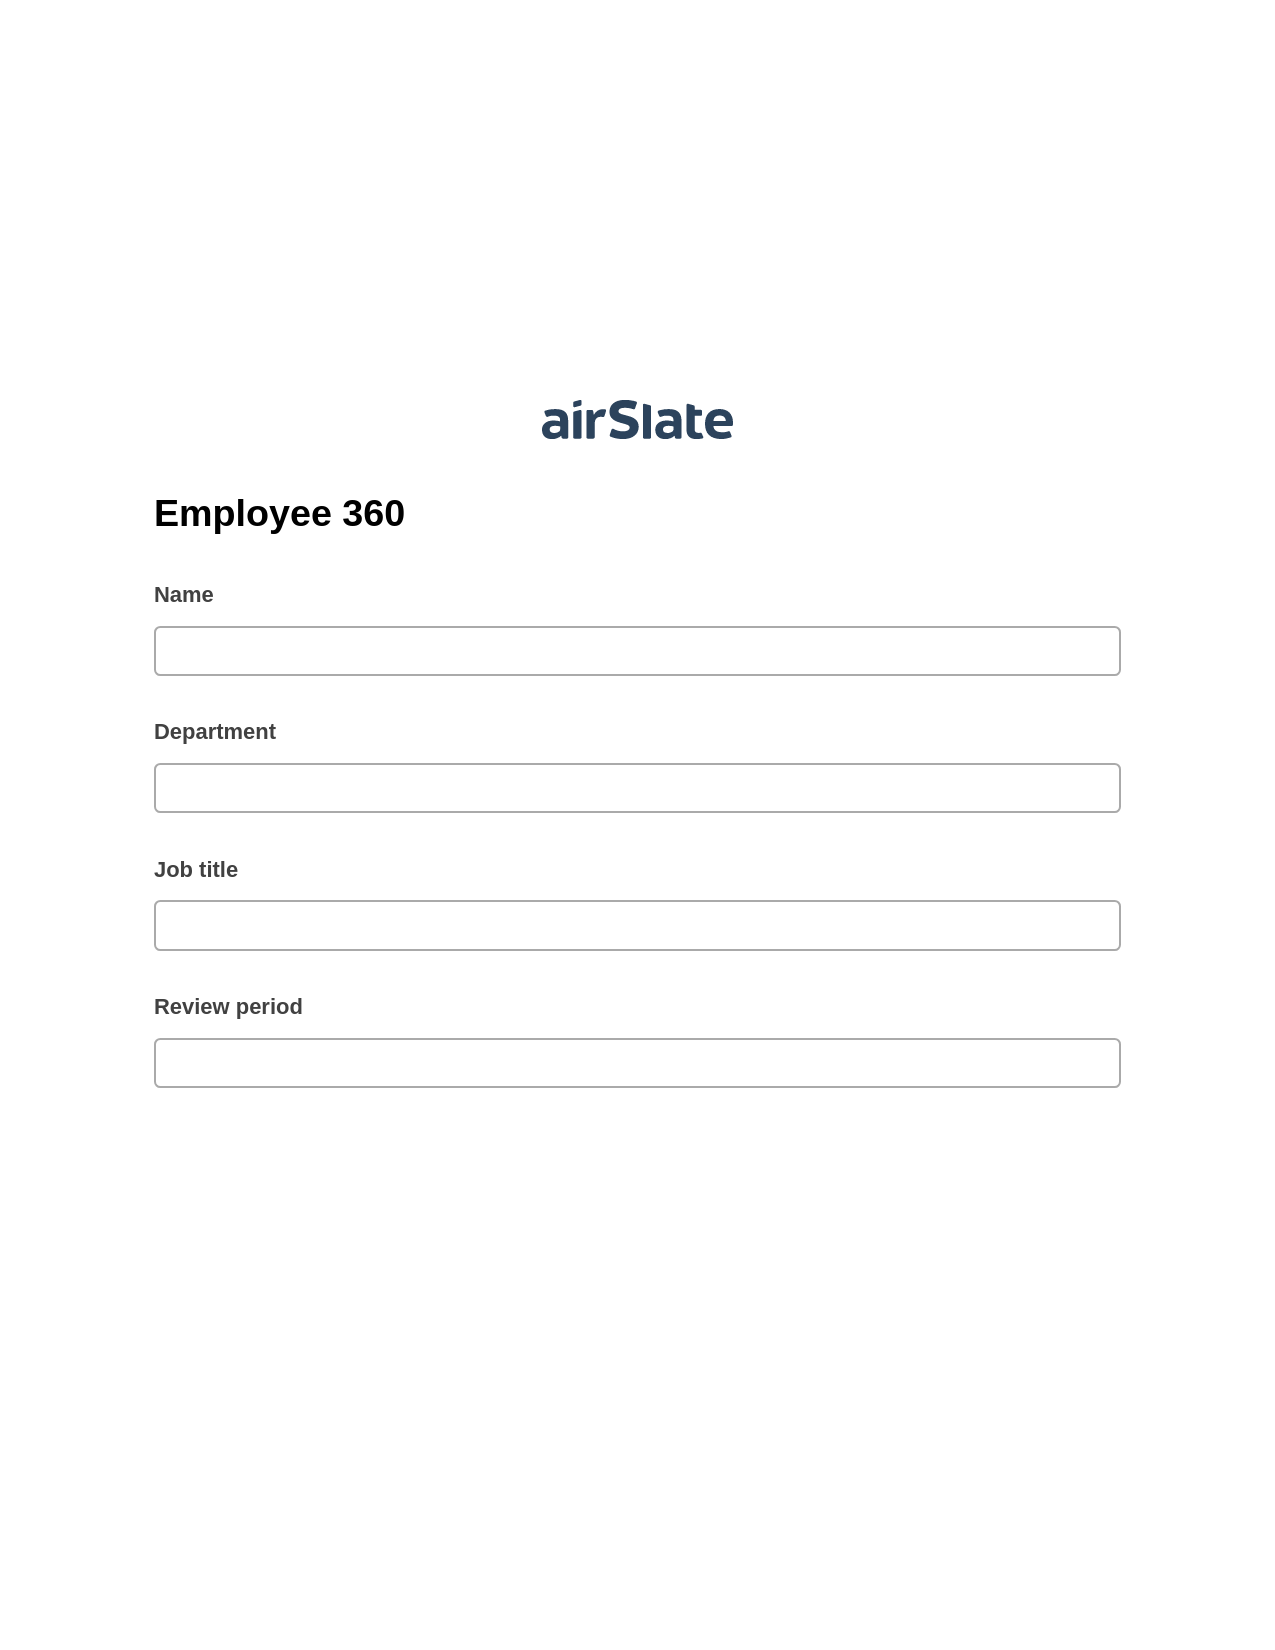 Employee 360 Pre-fill from another Slate Bot, Update MS Dynamics 365 Record Bot, Archive to Dropbox Bot